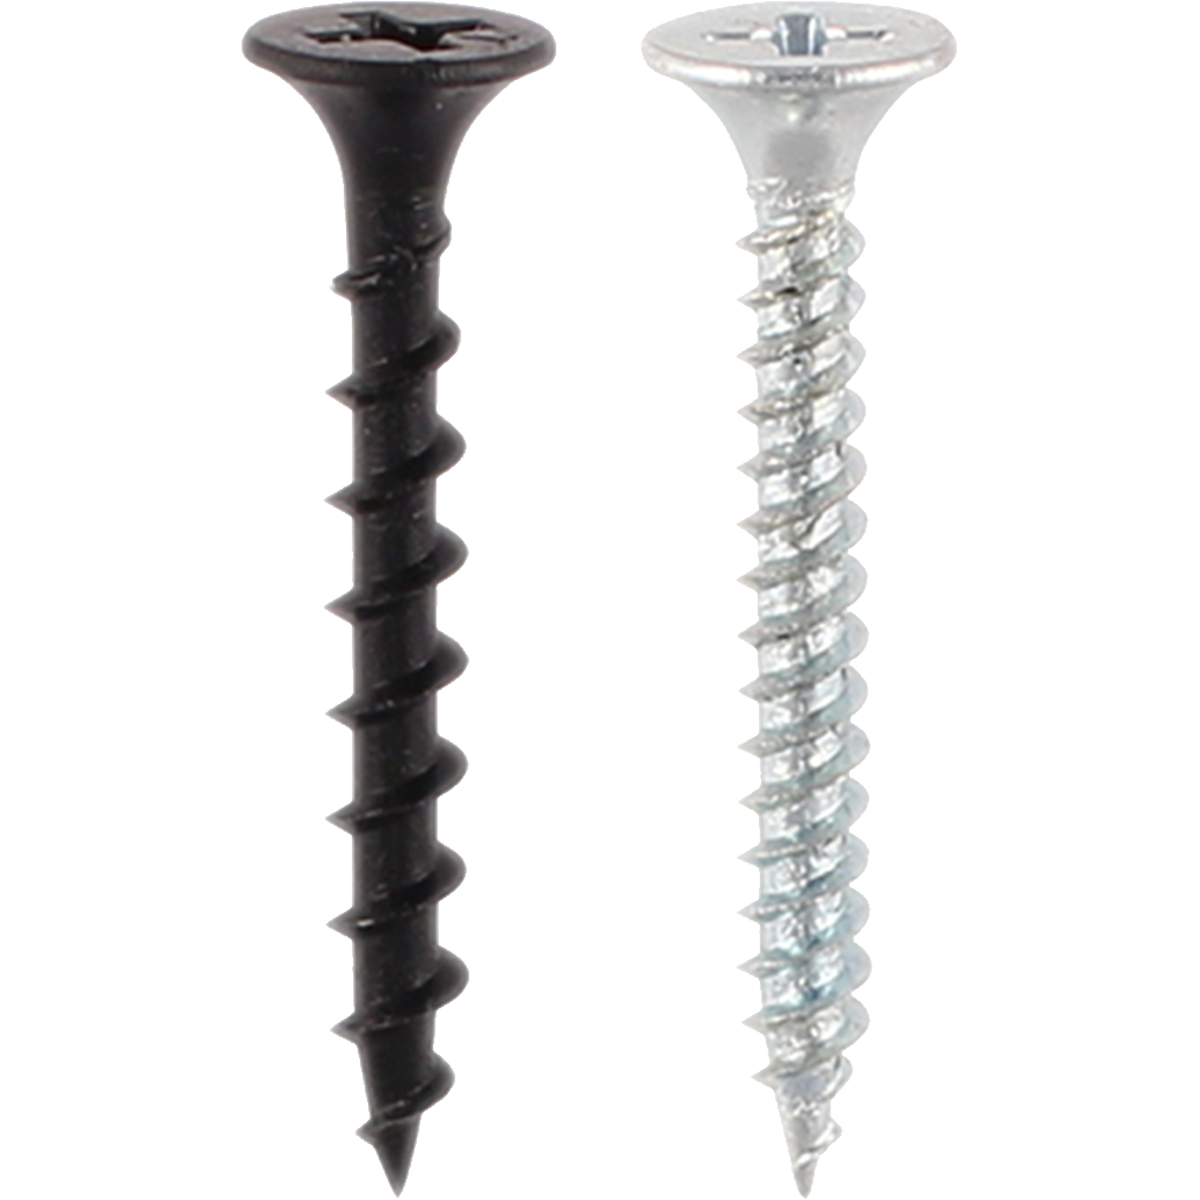  drywall screws at competitive prices.